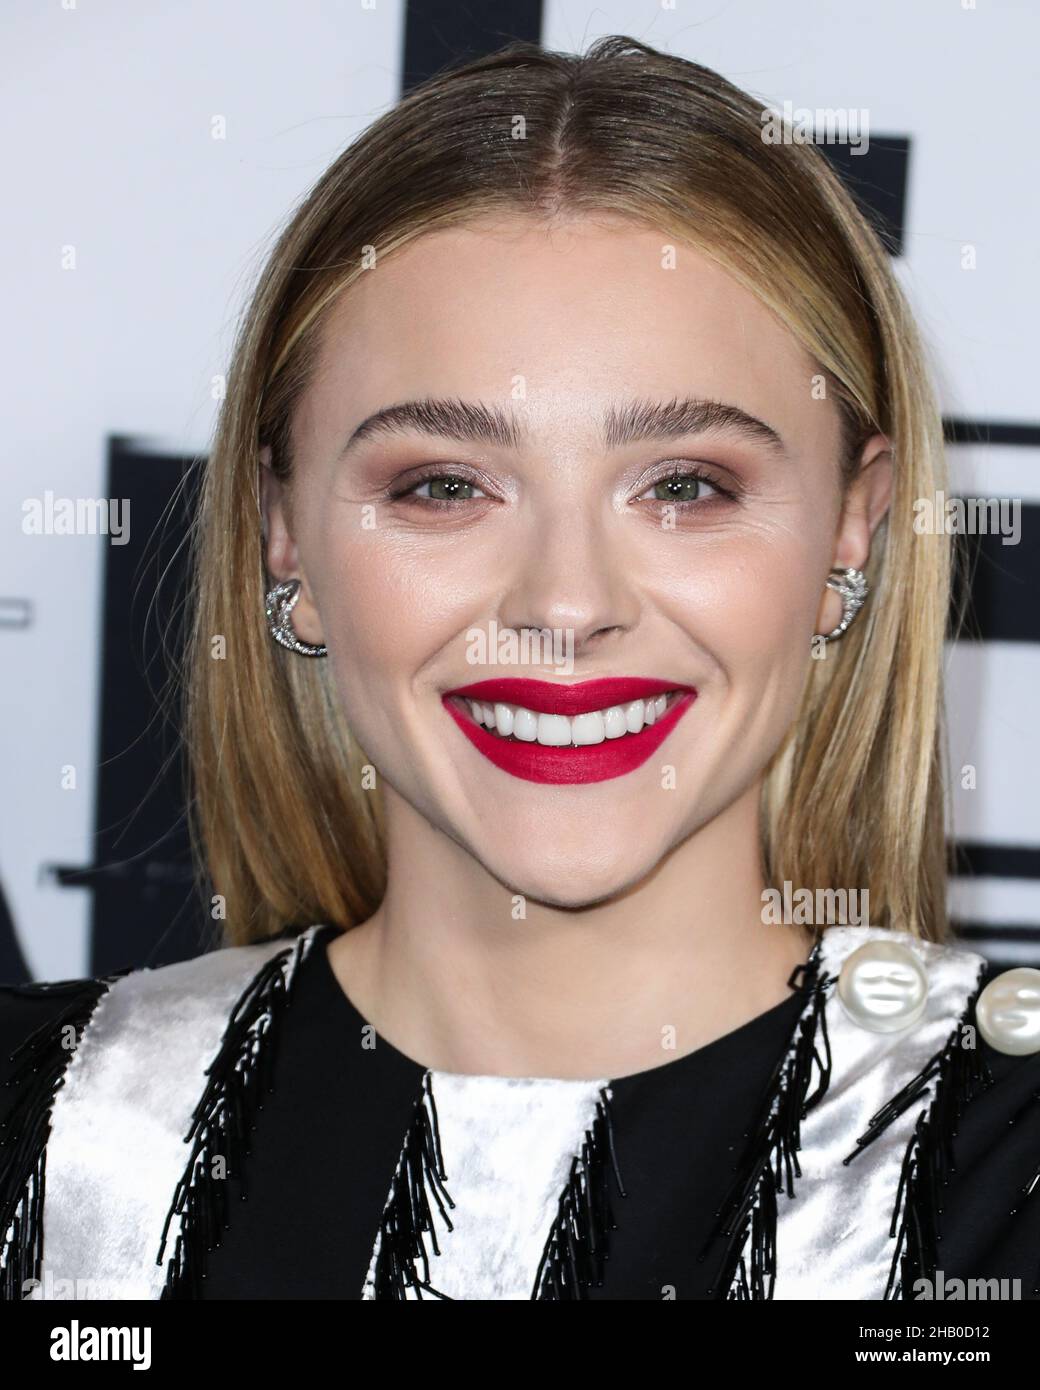 Scaling New Heights, Chloë Grace Moretz Returns to Film in Trinity on  Thursday – The University Times